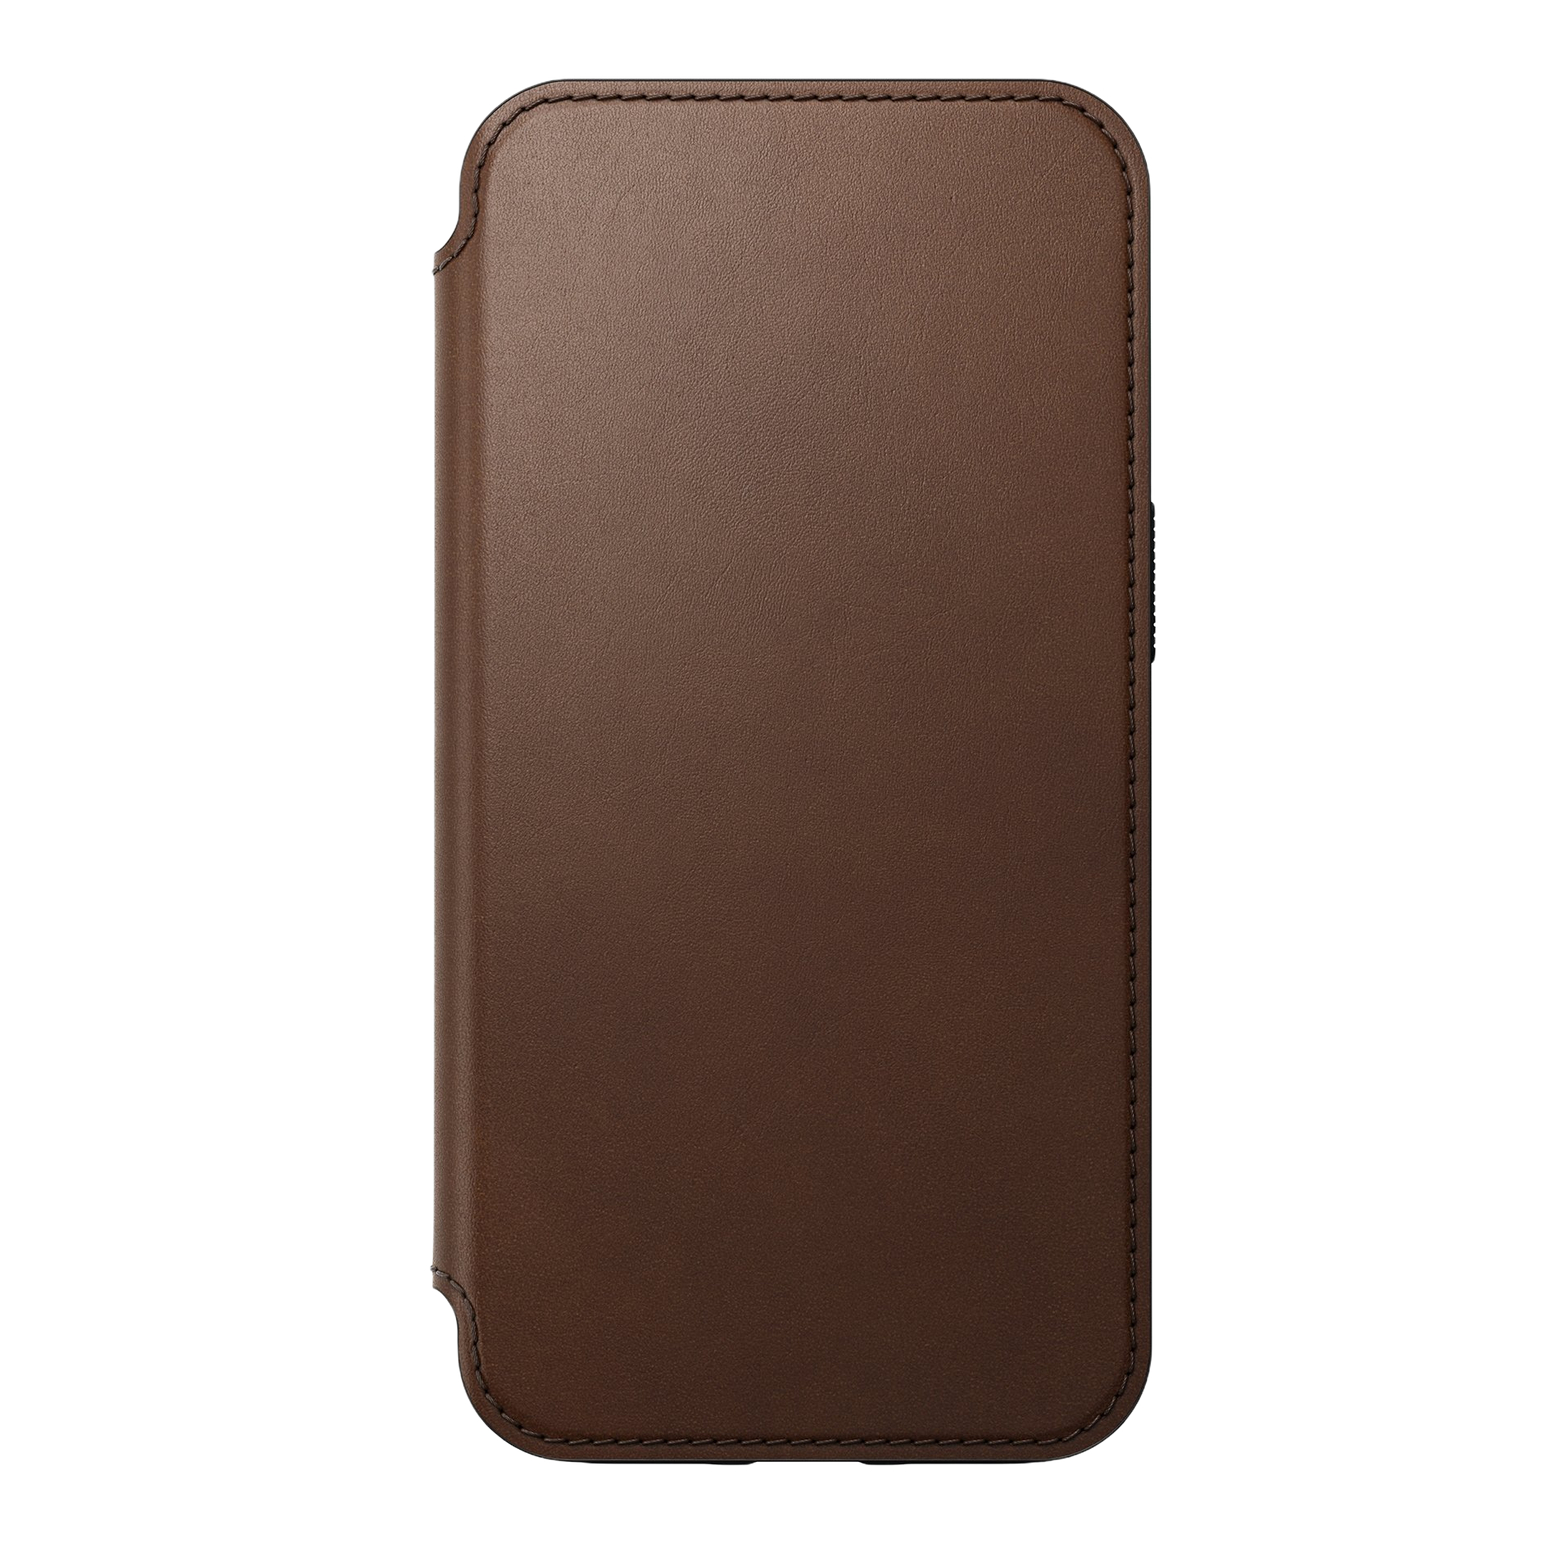 Nomad Modern MagSafe Folio with Horween Leather for iPhone 13 - Rustic Brown - Discontinued